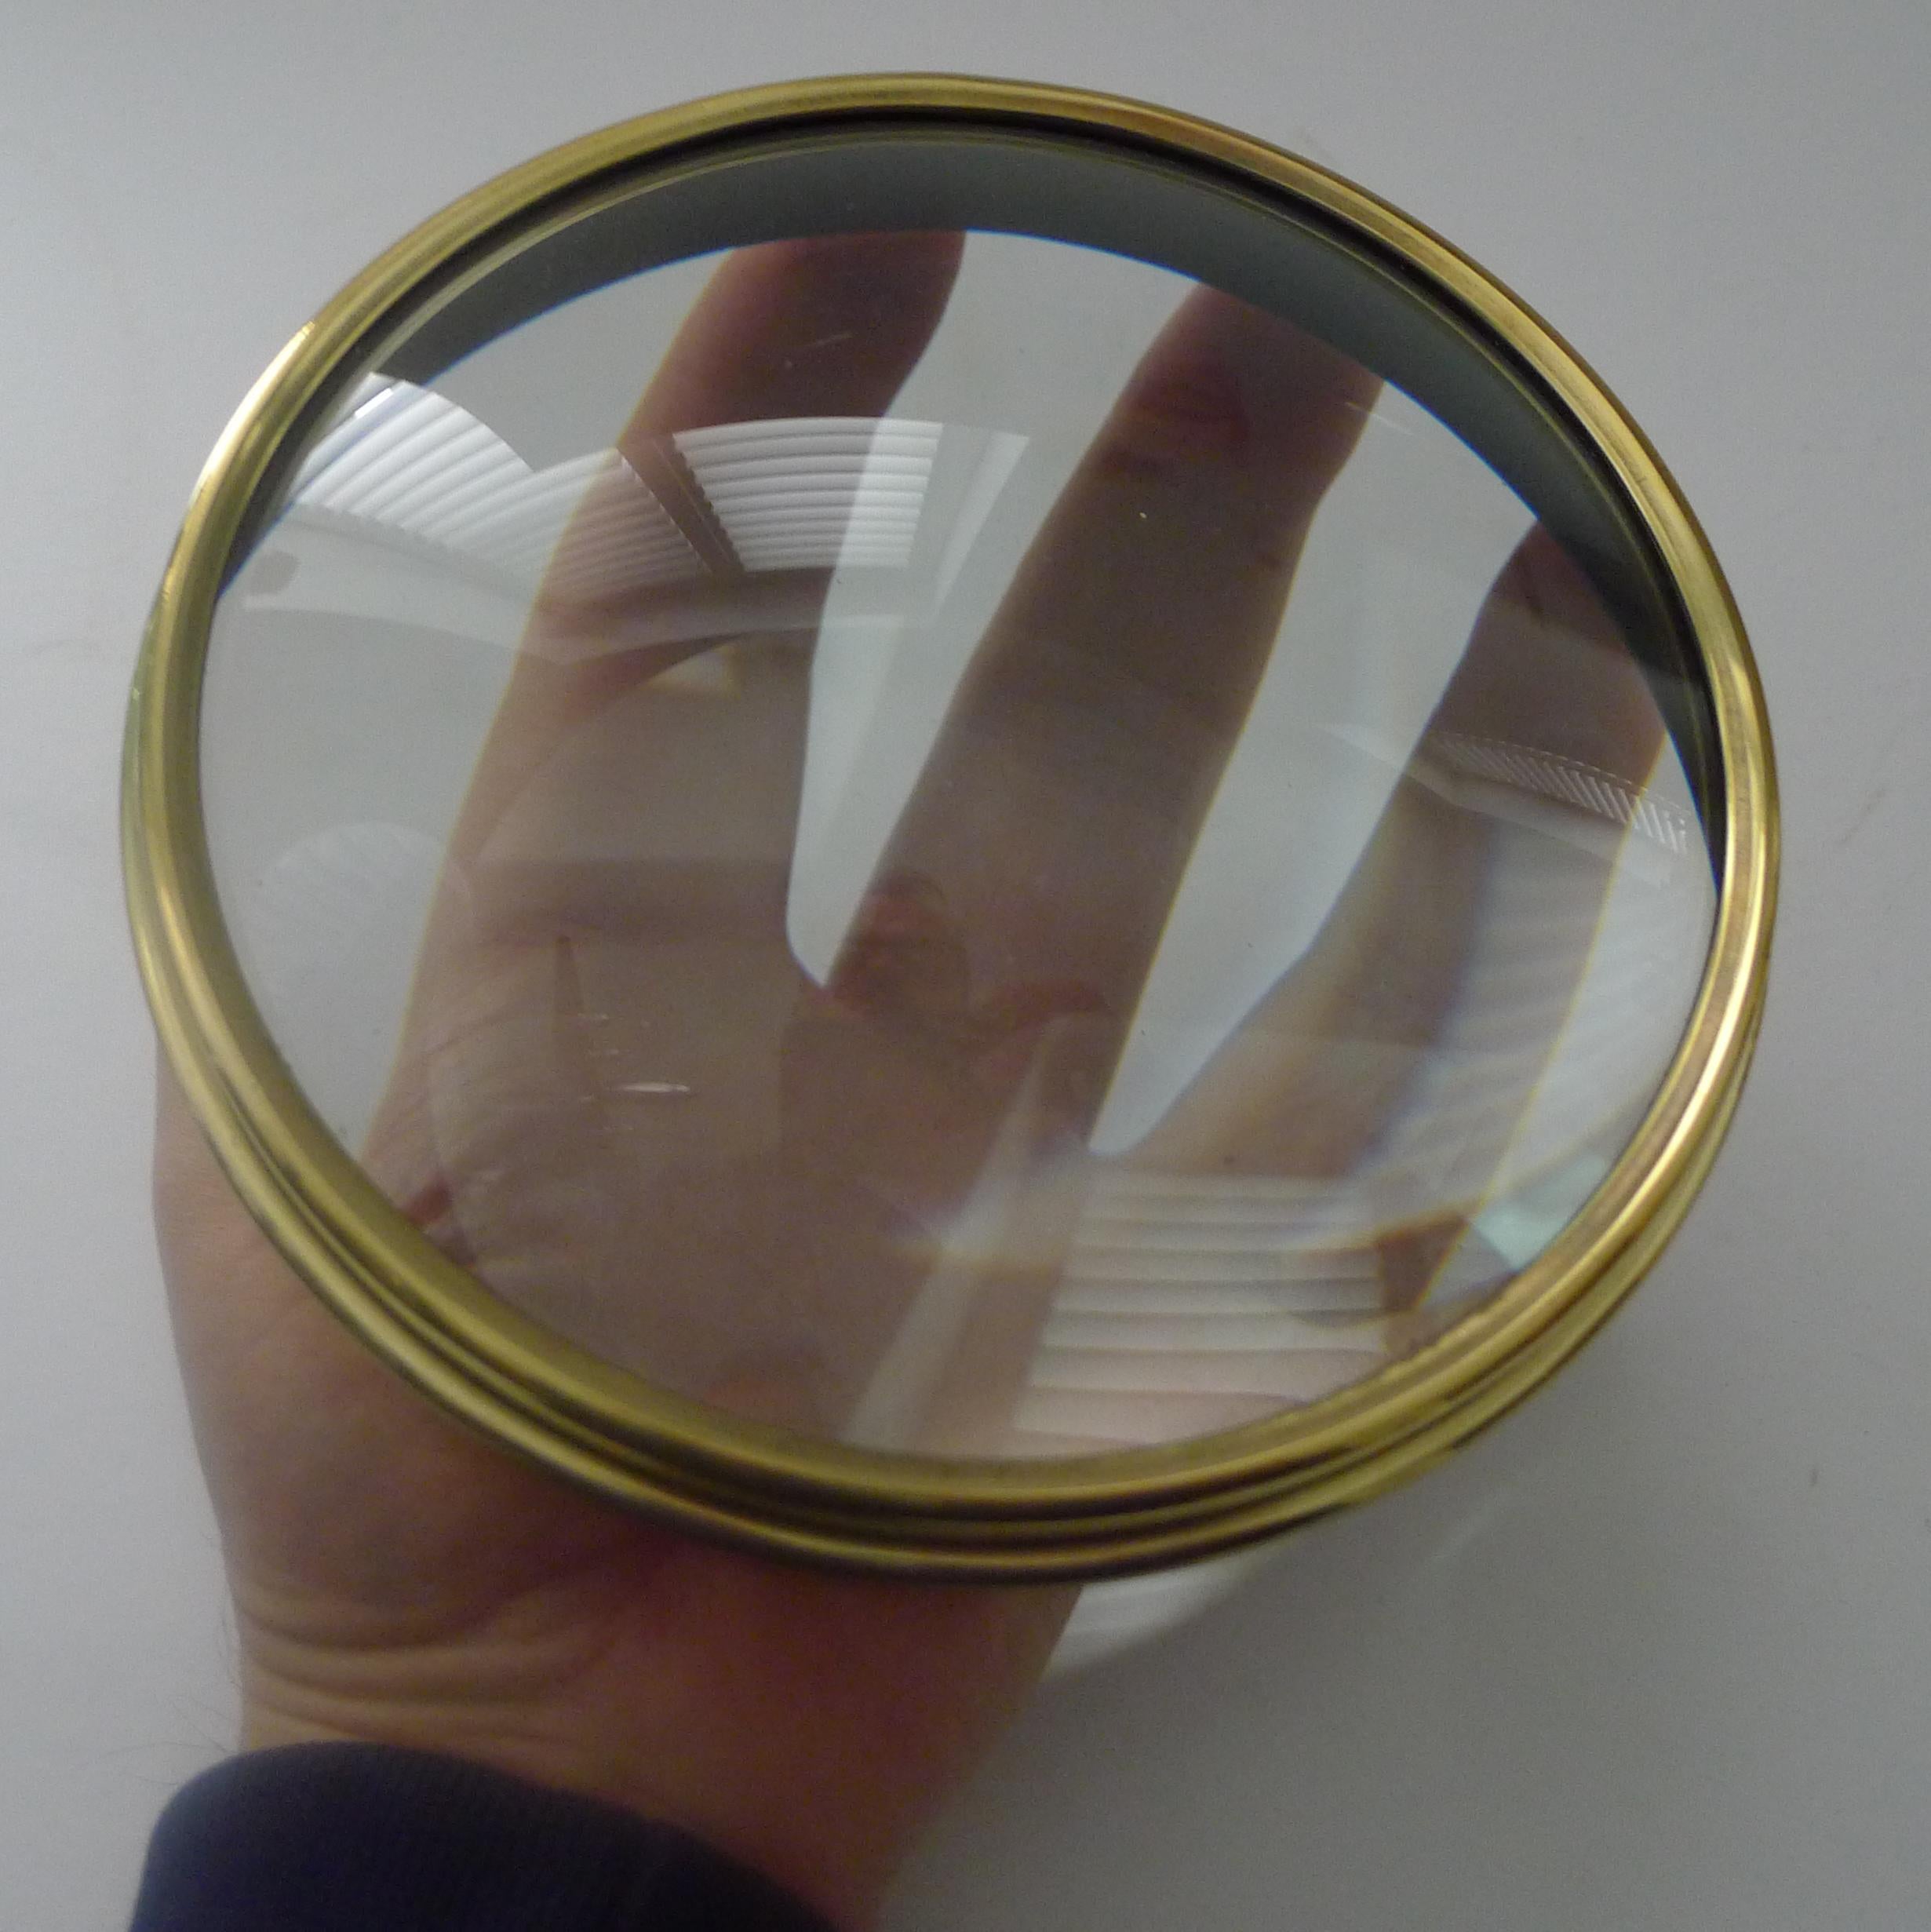 Early 20th Century Oversized English Antique Brass Desk Magnifying Glass / Paperweight, c.1910